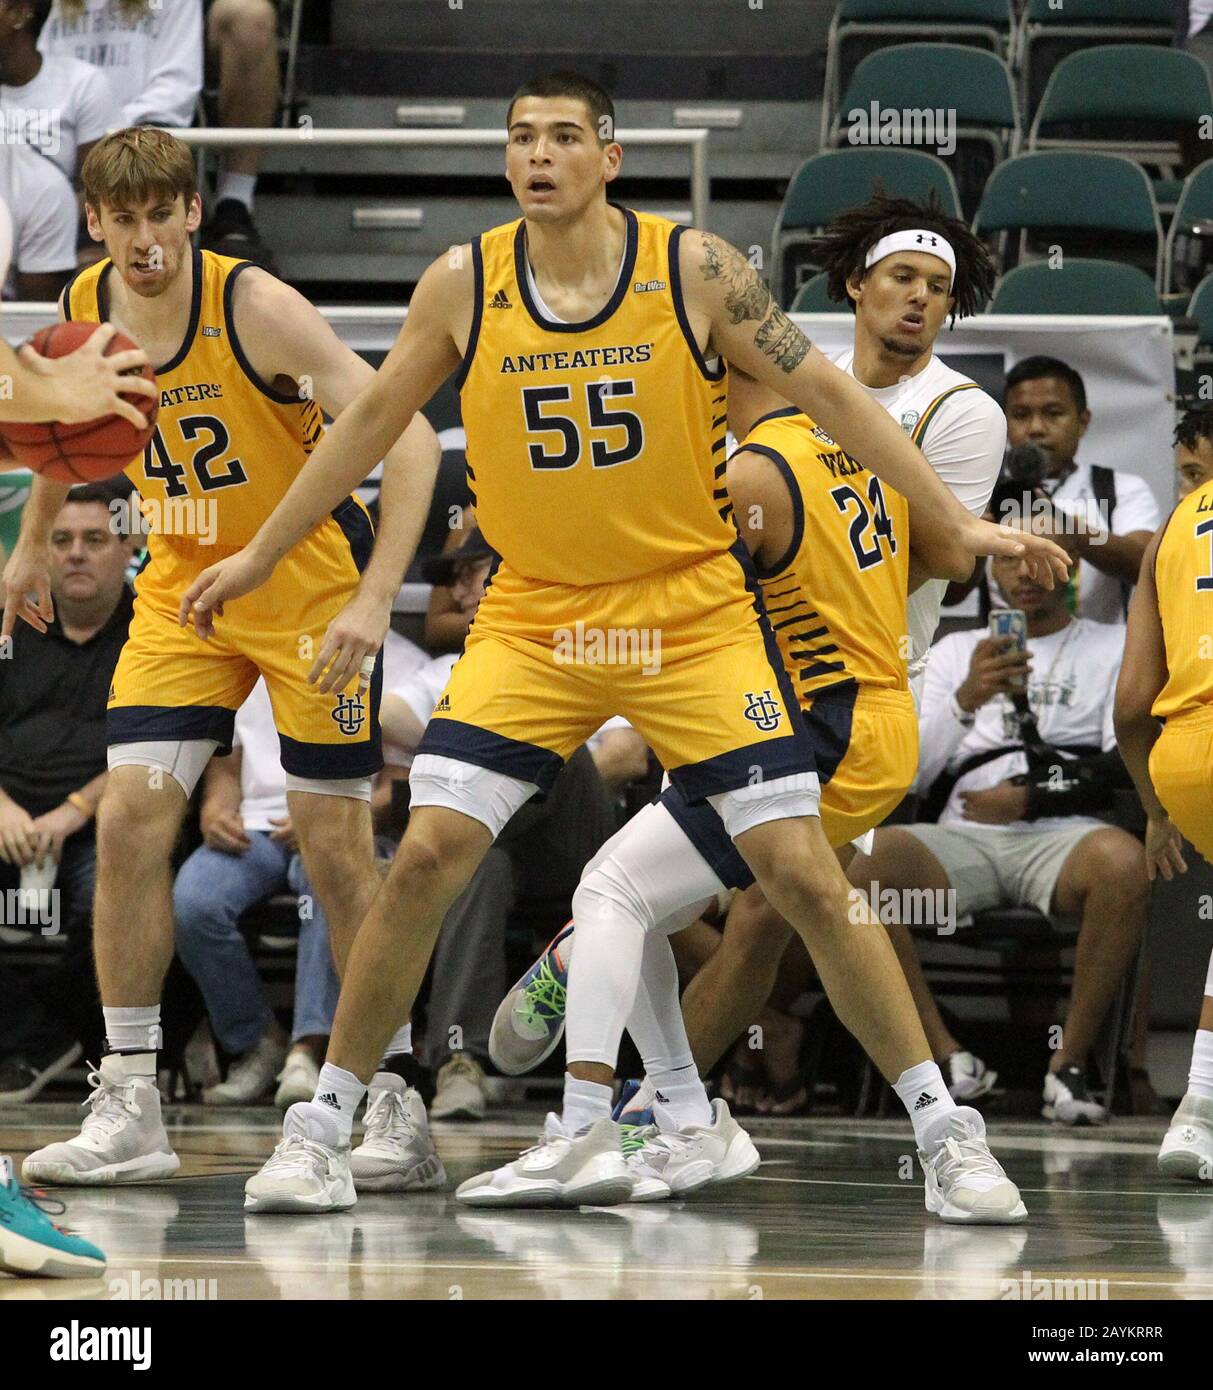 February 15, 2020 - UC Irvine Anteaters center Brad Greene (55) defends during a game between the UC Irvine Anteaters and the Hawaii Rainbow Warriors at the Stan Sheriff Center in Honolulu, HI - Michael Sullivan/CSM Stock Photo